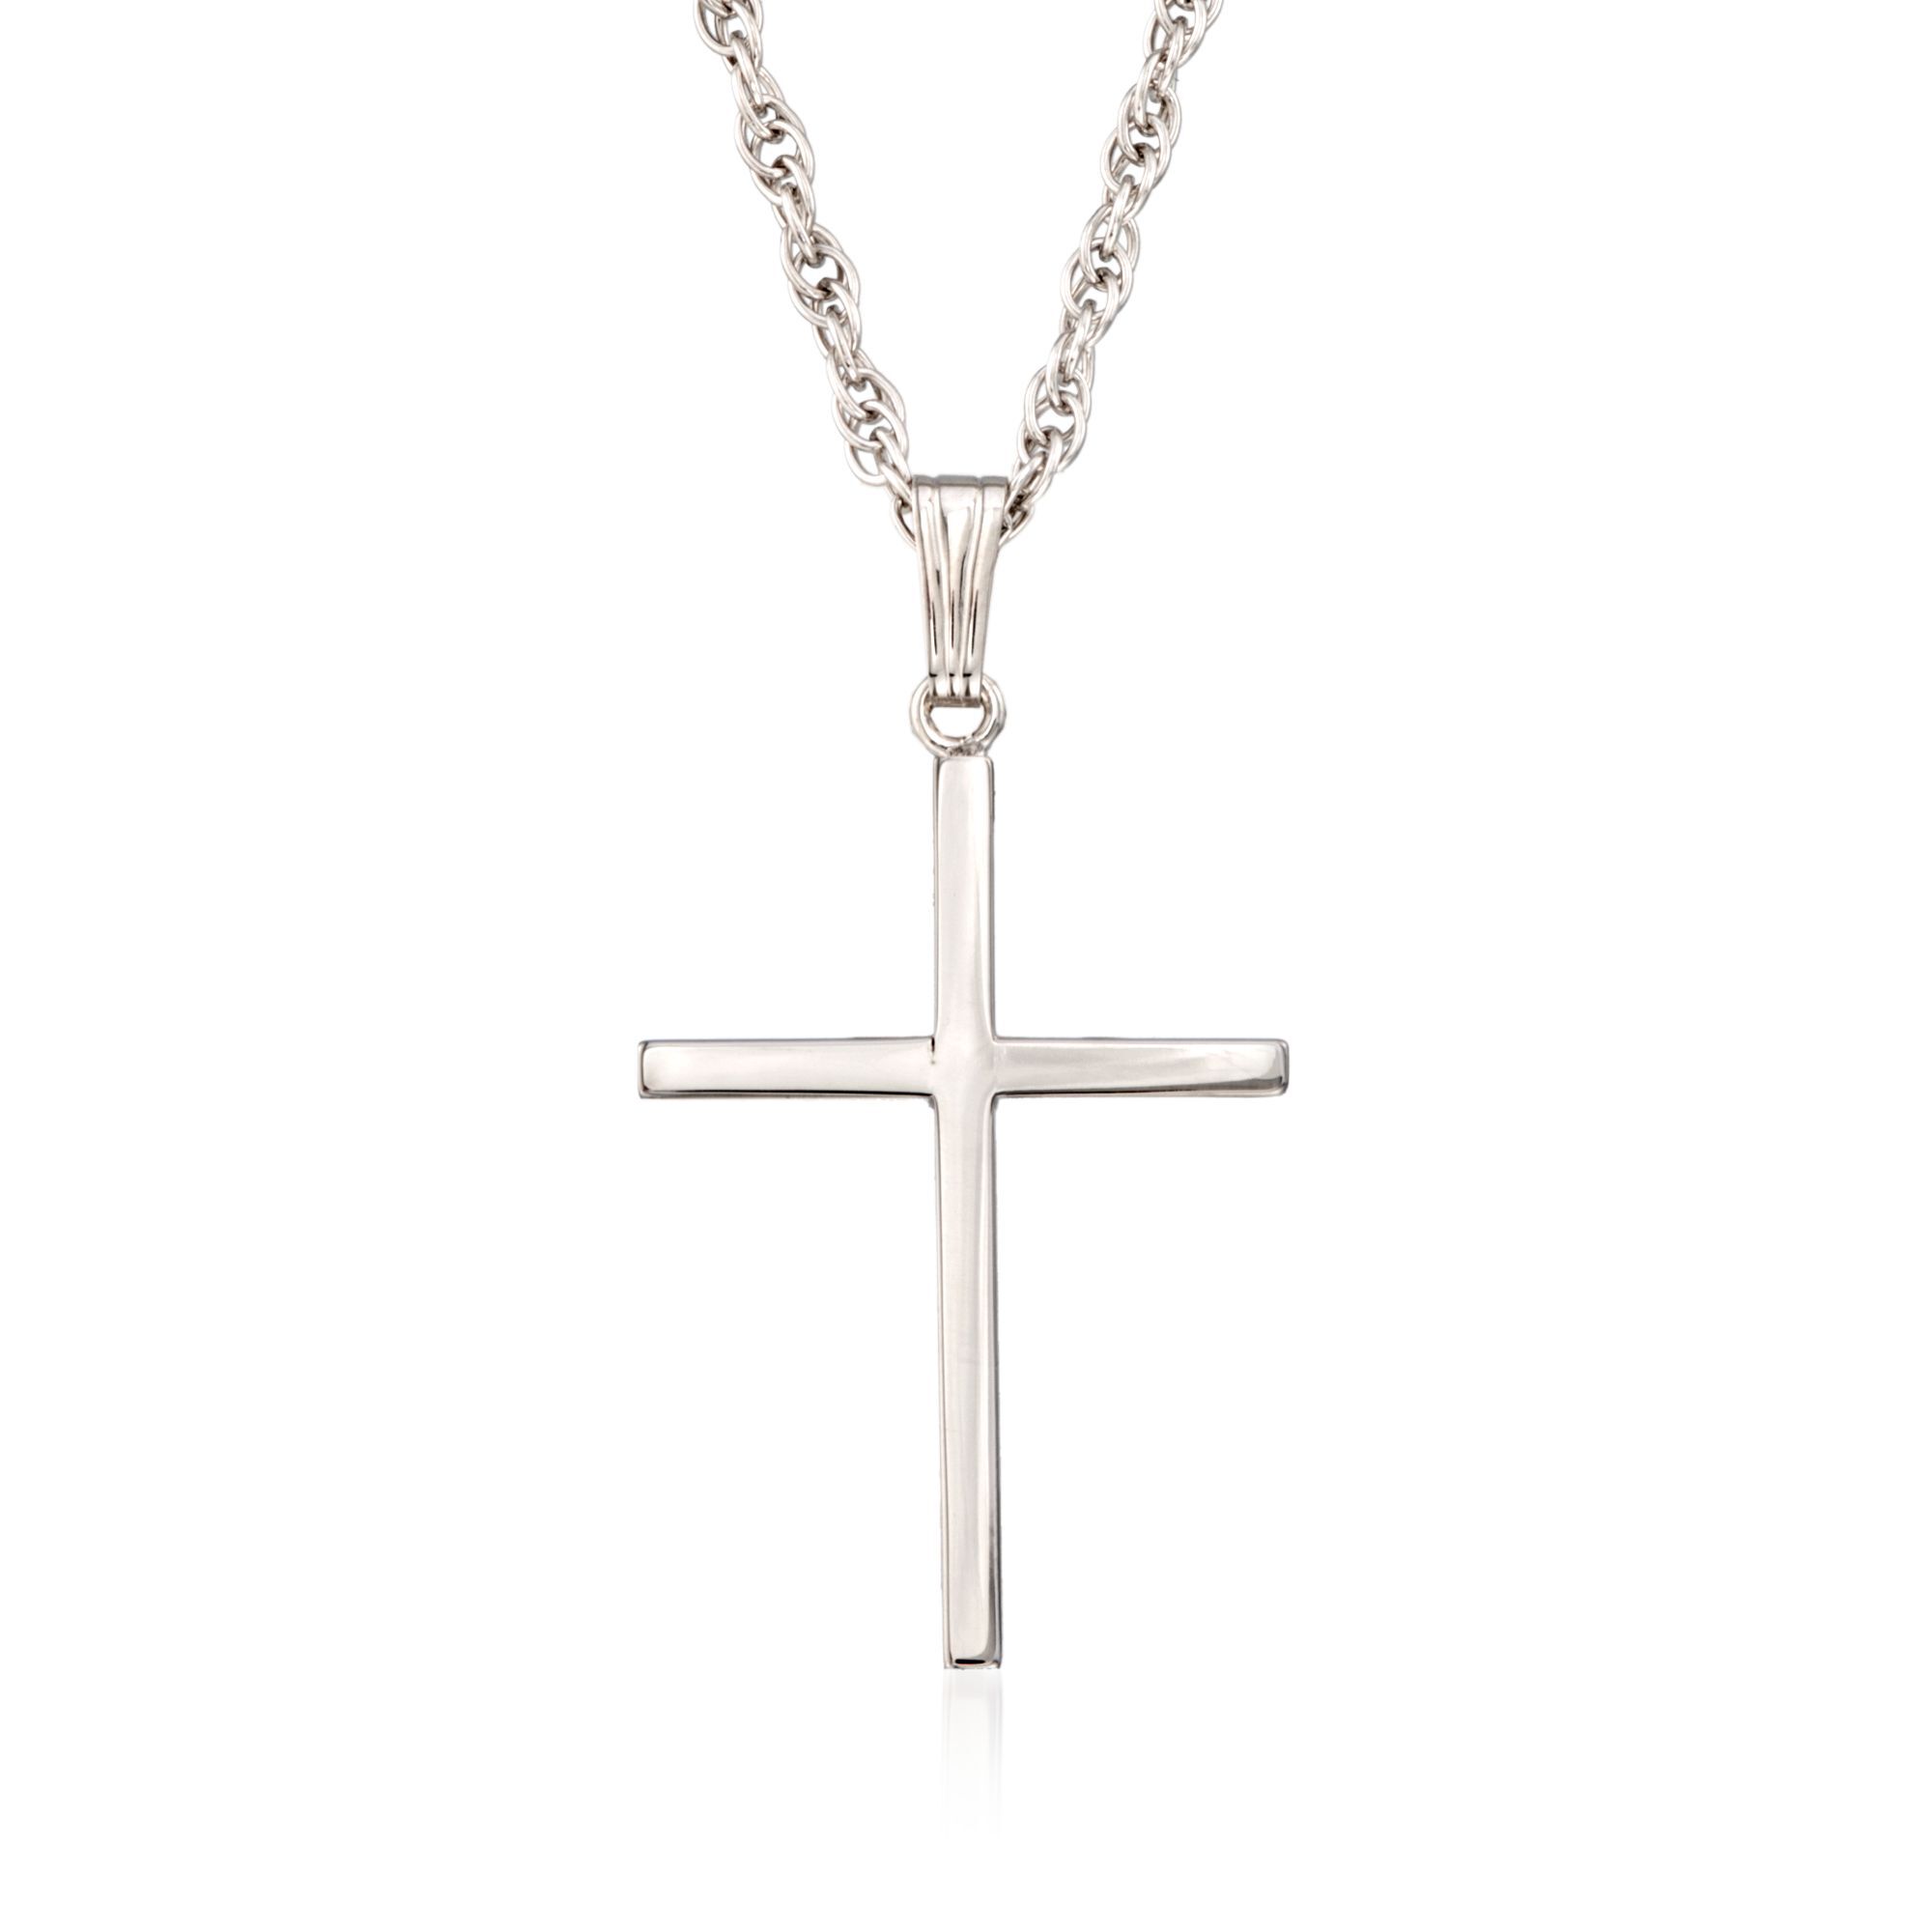 Sterling Silver Baby Cross Charm Pendant Necklace 16 inch Children/'s Cross